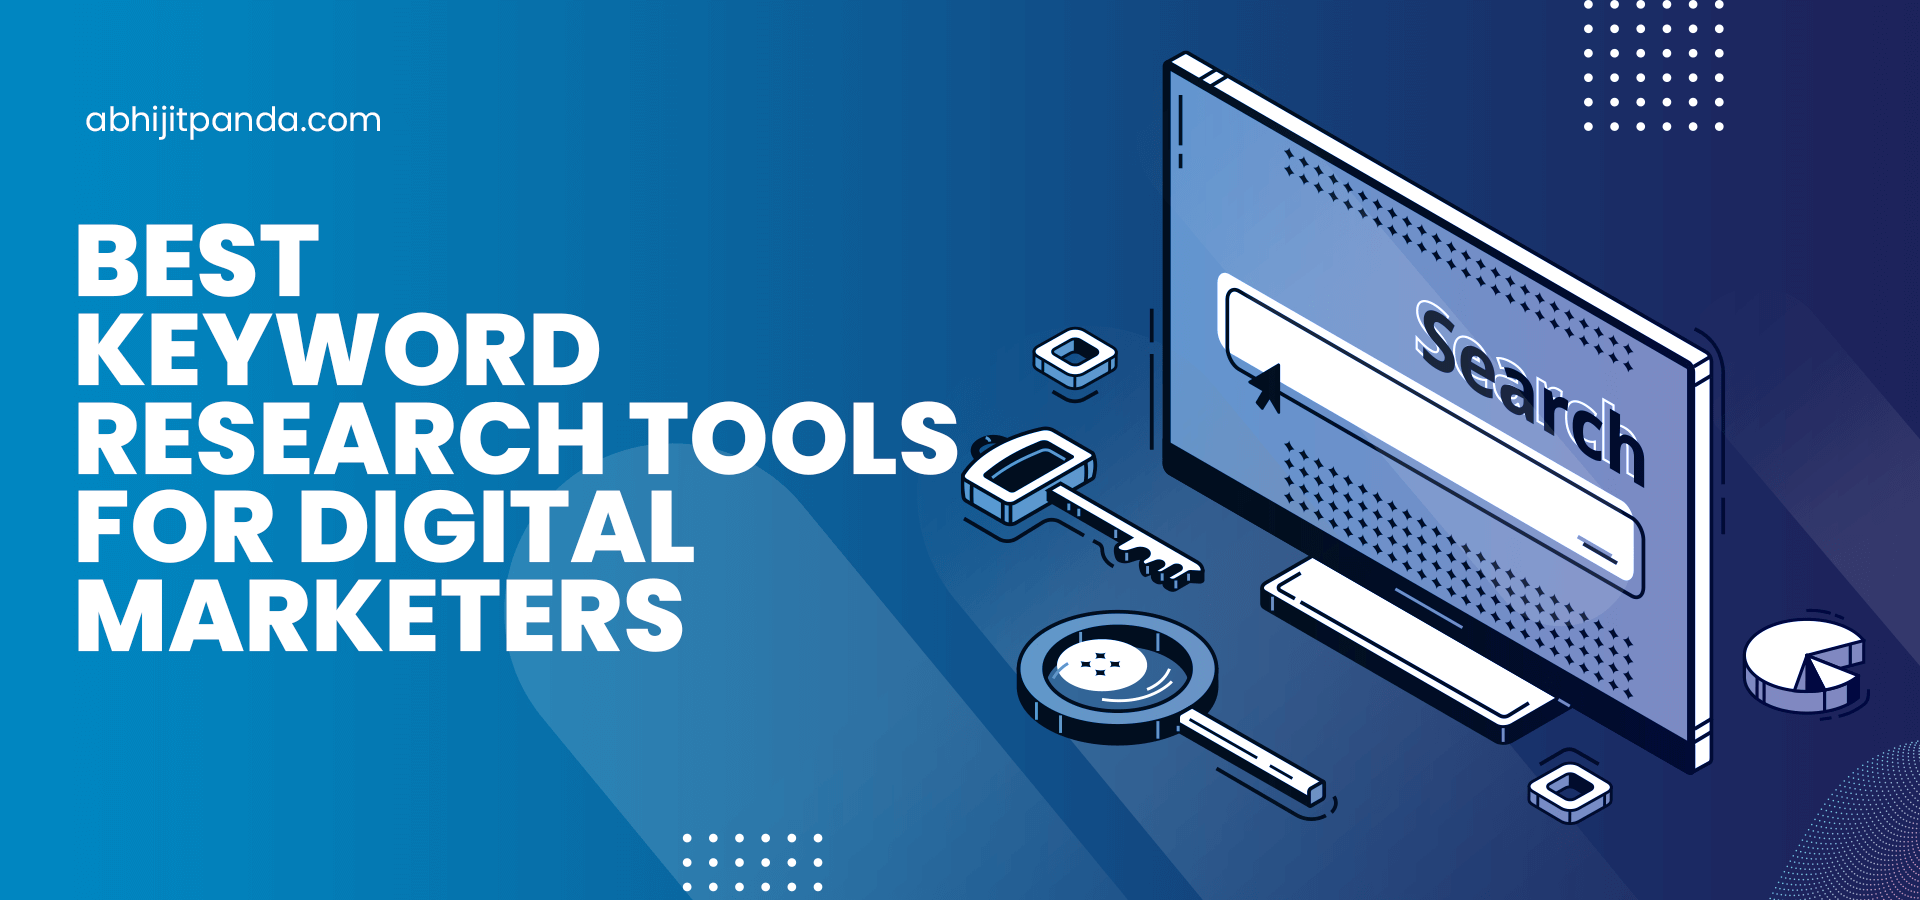 19 Best Keyword Research Tools for Digital Marketers